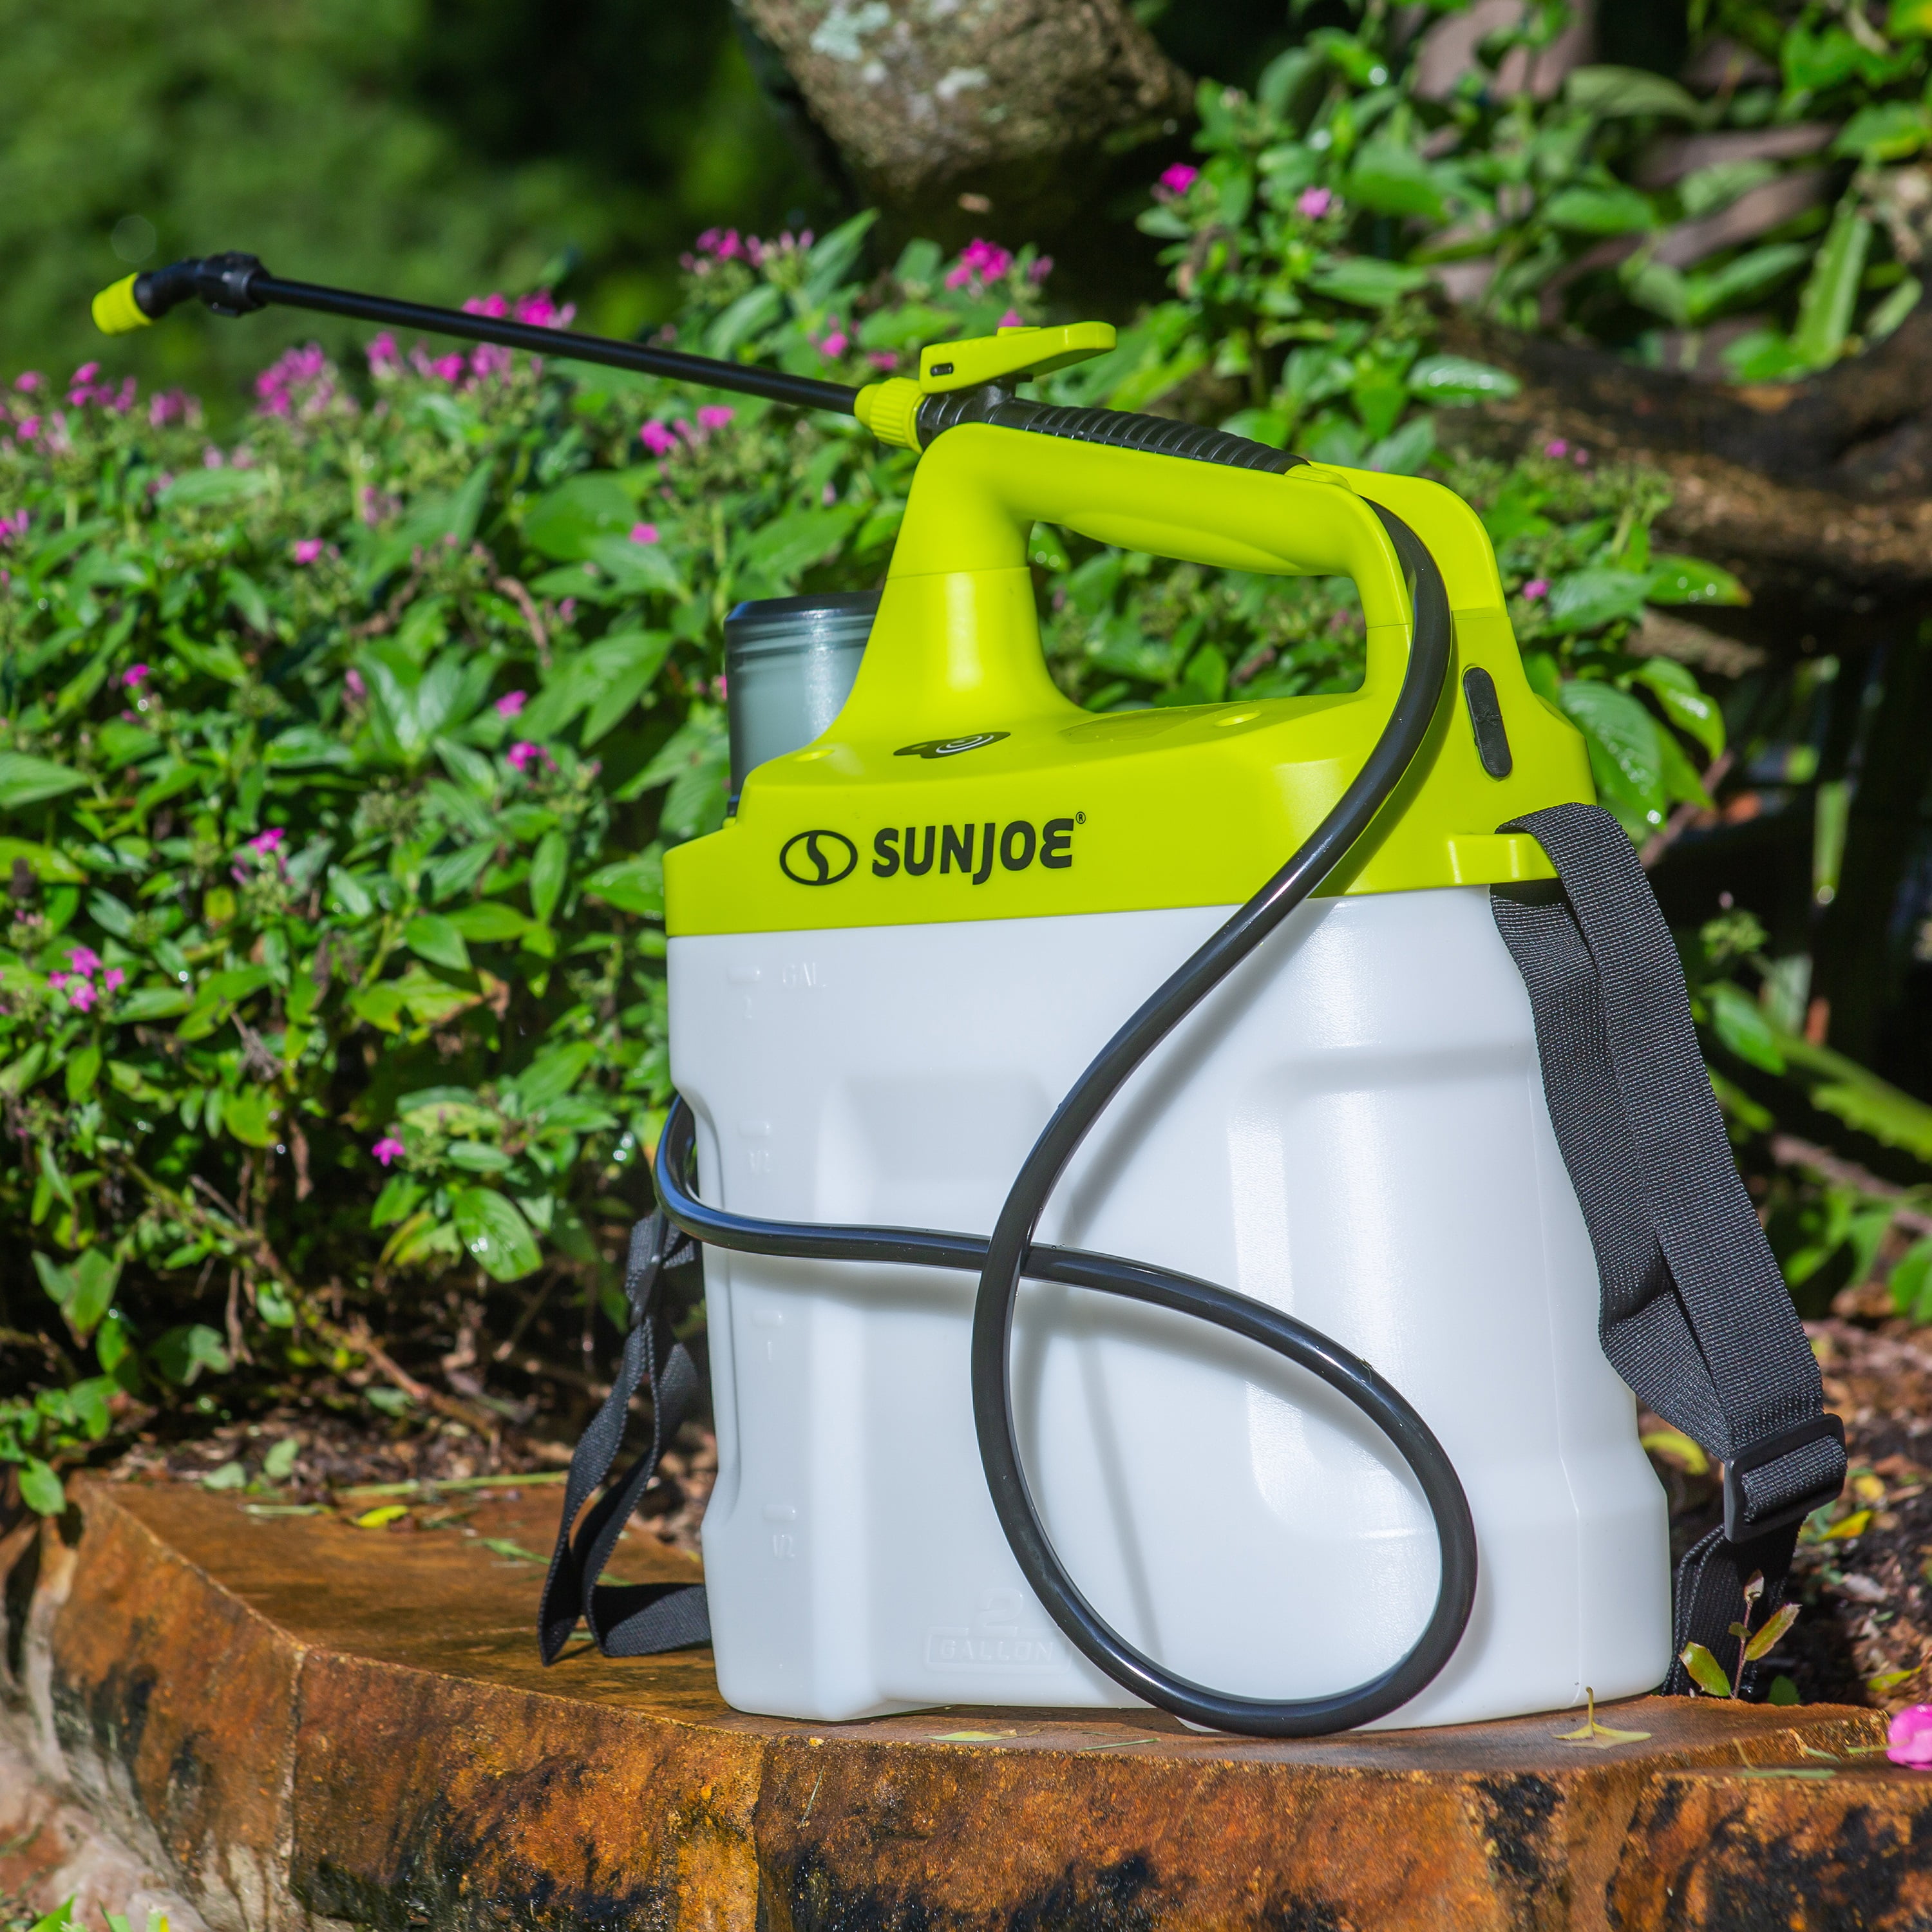 How To Operate and Care For Your Chemical Sprayer - Garden Gate Guides